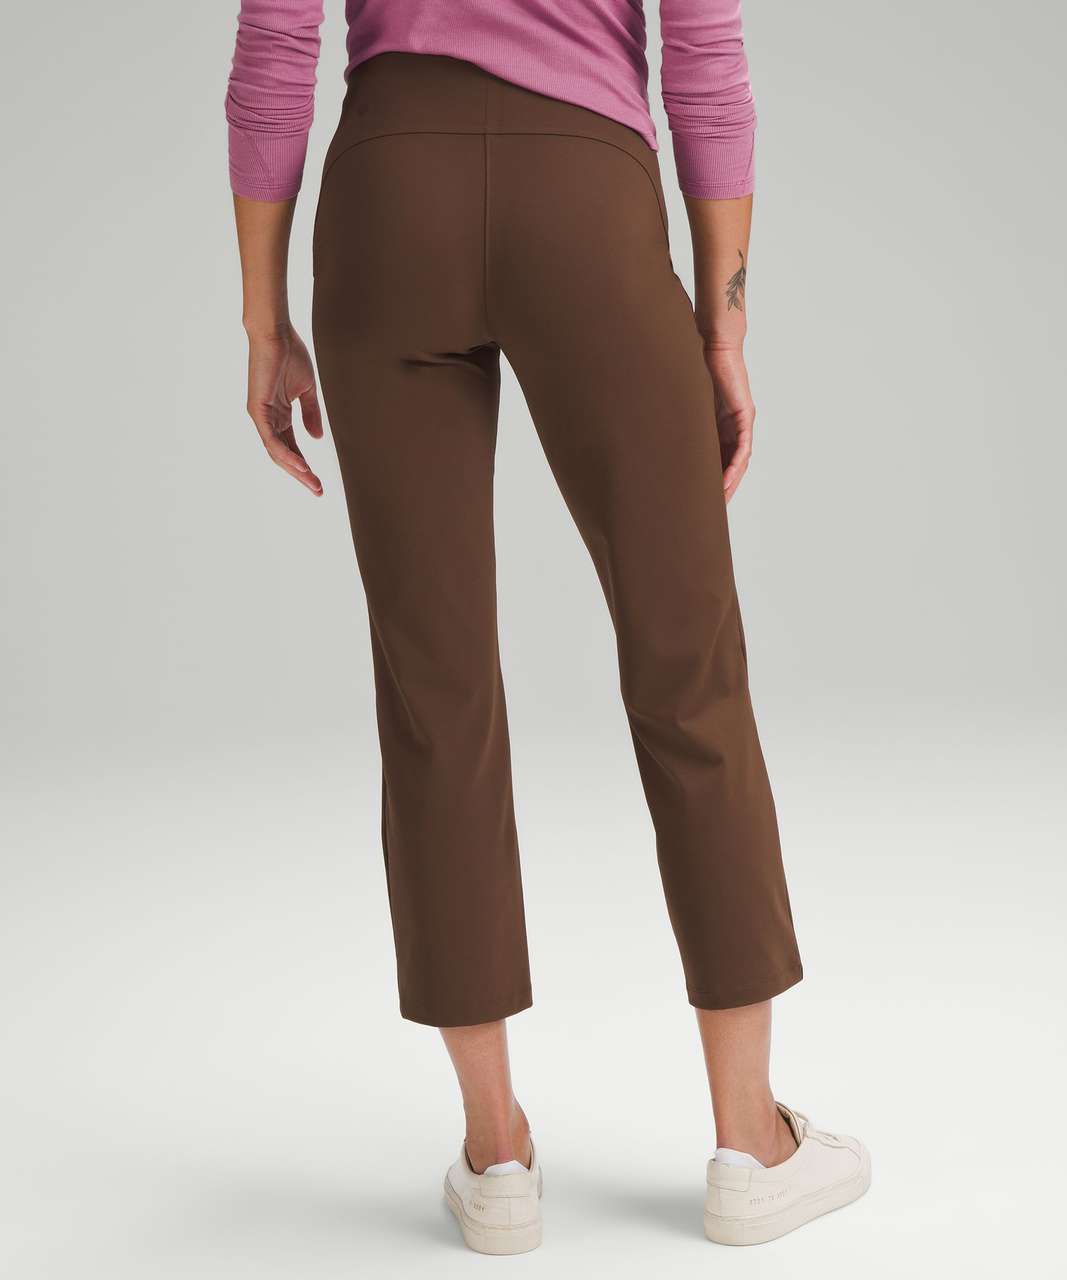 Lululemon Smooth Fit Pull-On High-Rise Cropped Pants - Java